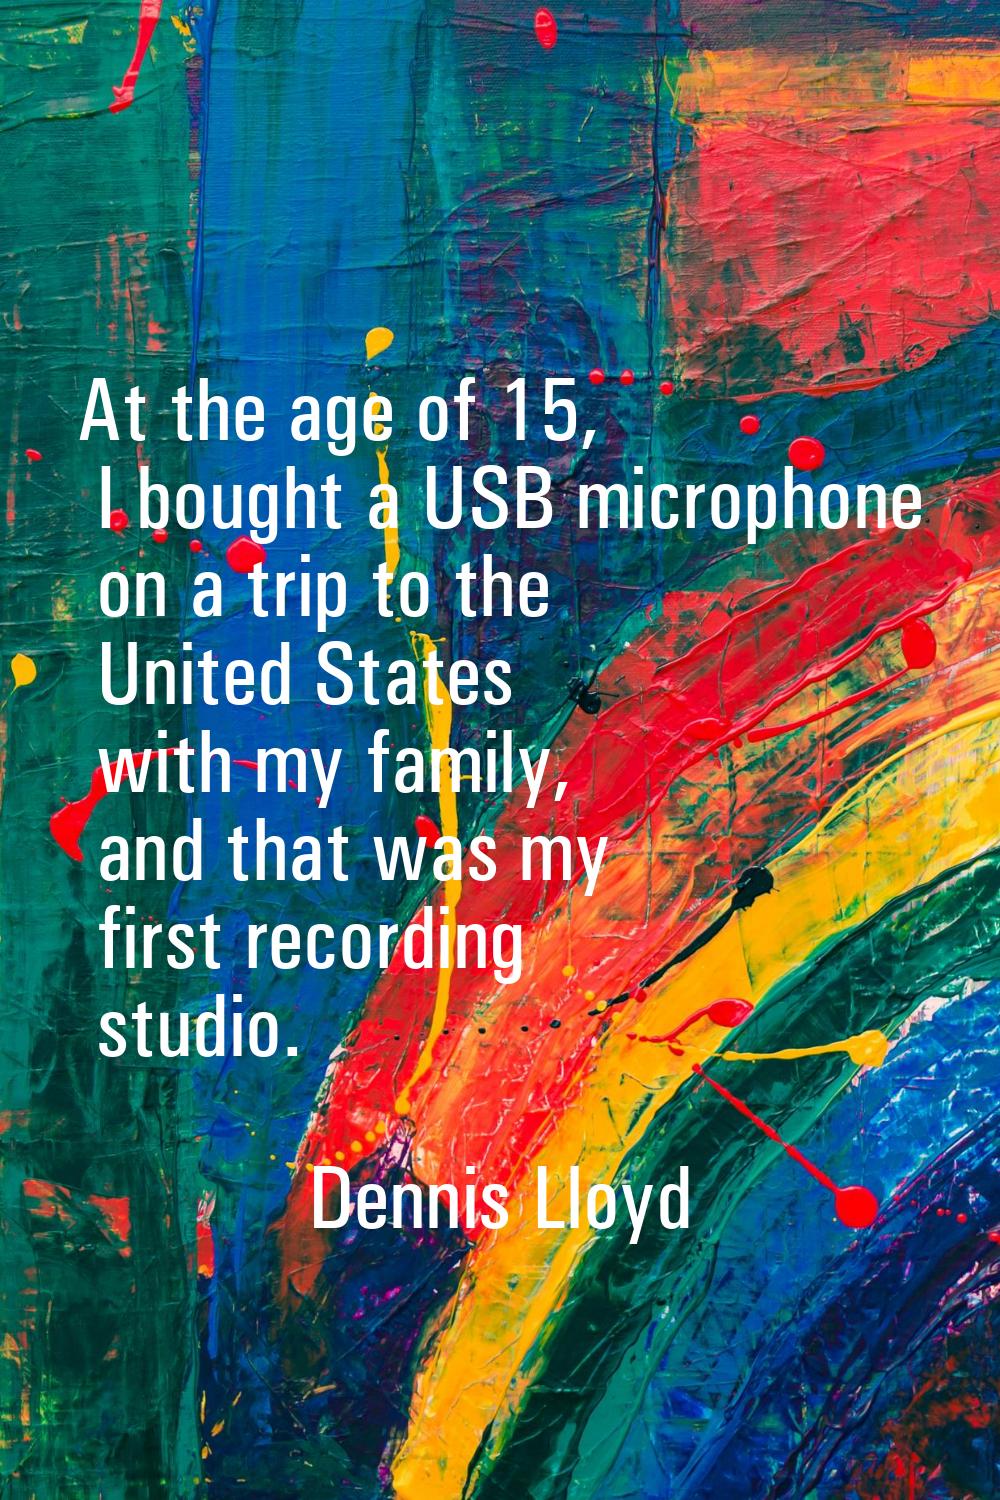 At the age of 15, I bought a USB microphone on a trip to the United States with my family, and that